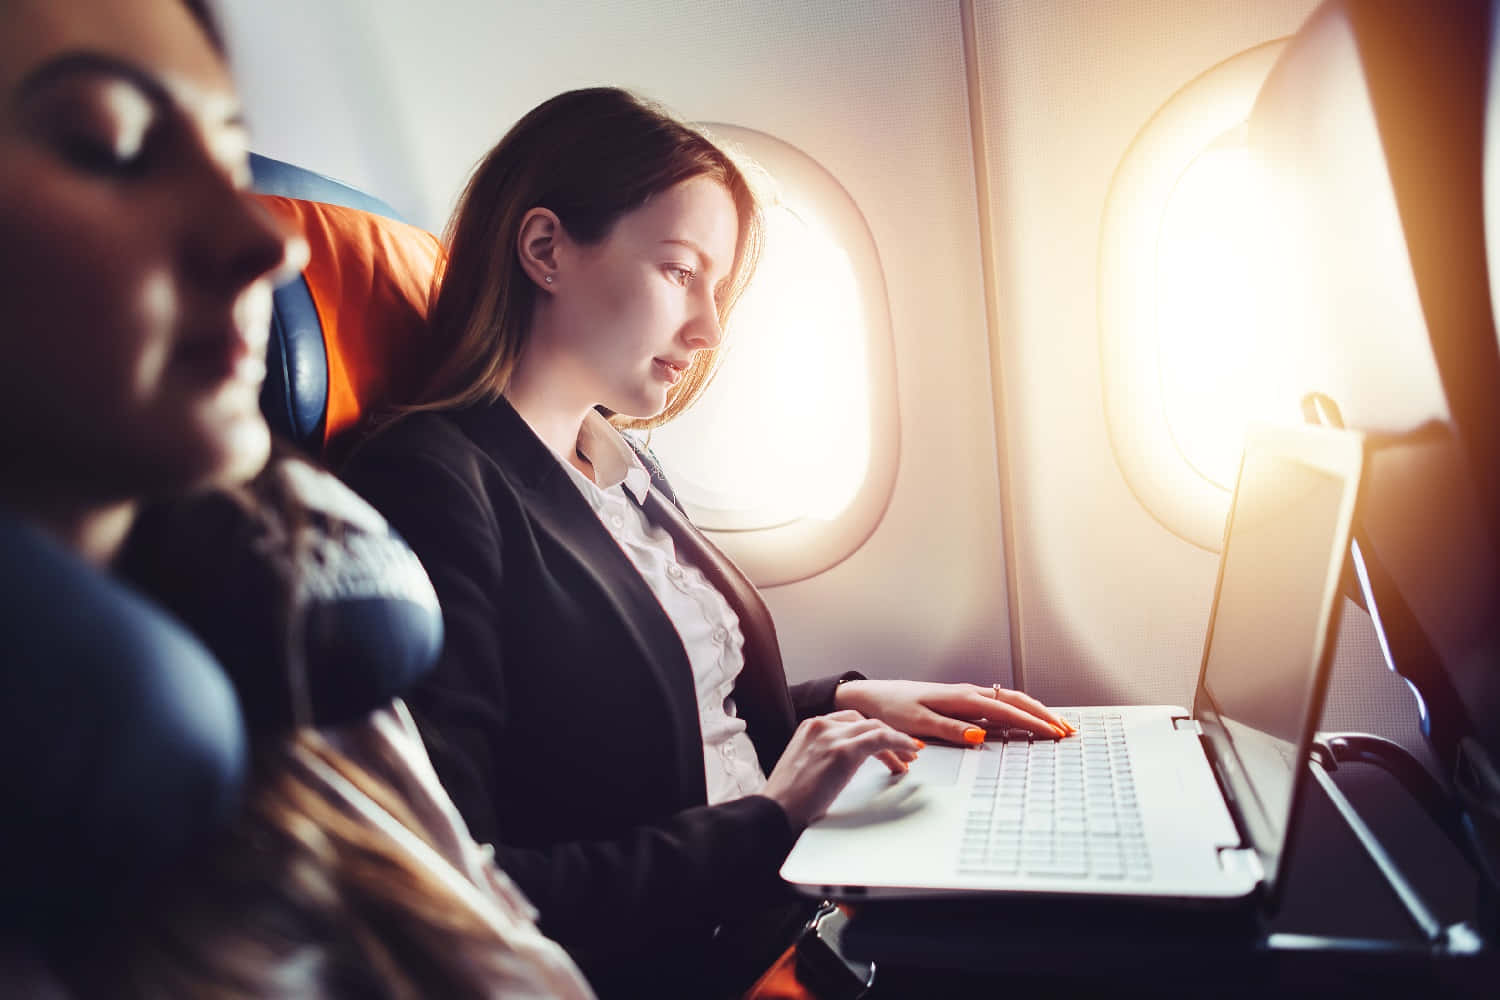 Picture Of Travelling Woman On An Airplane Wallpaper